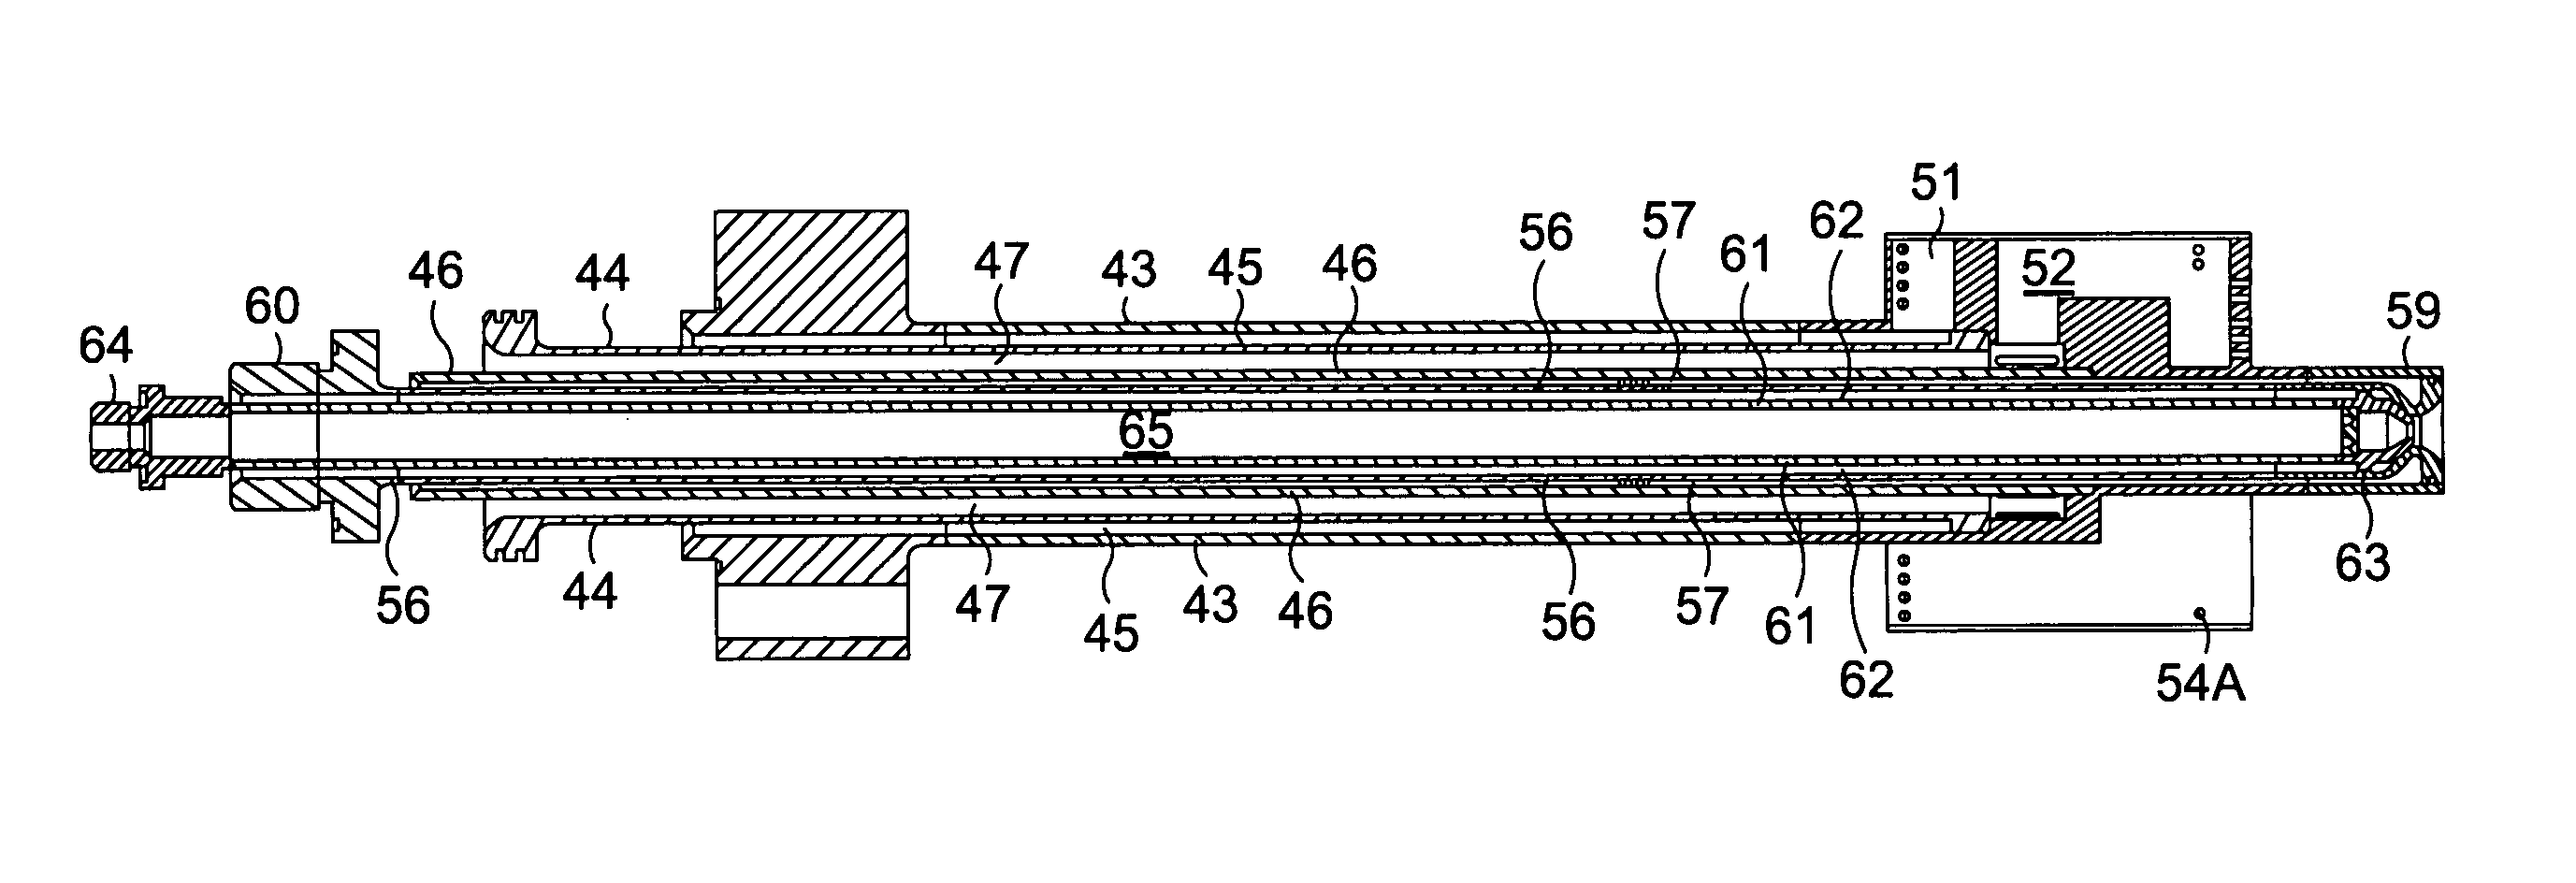 Fully premixed secondary fuel nozzle with dual fuel capability